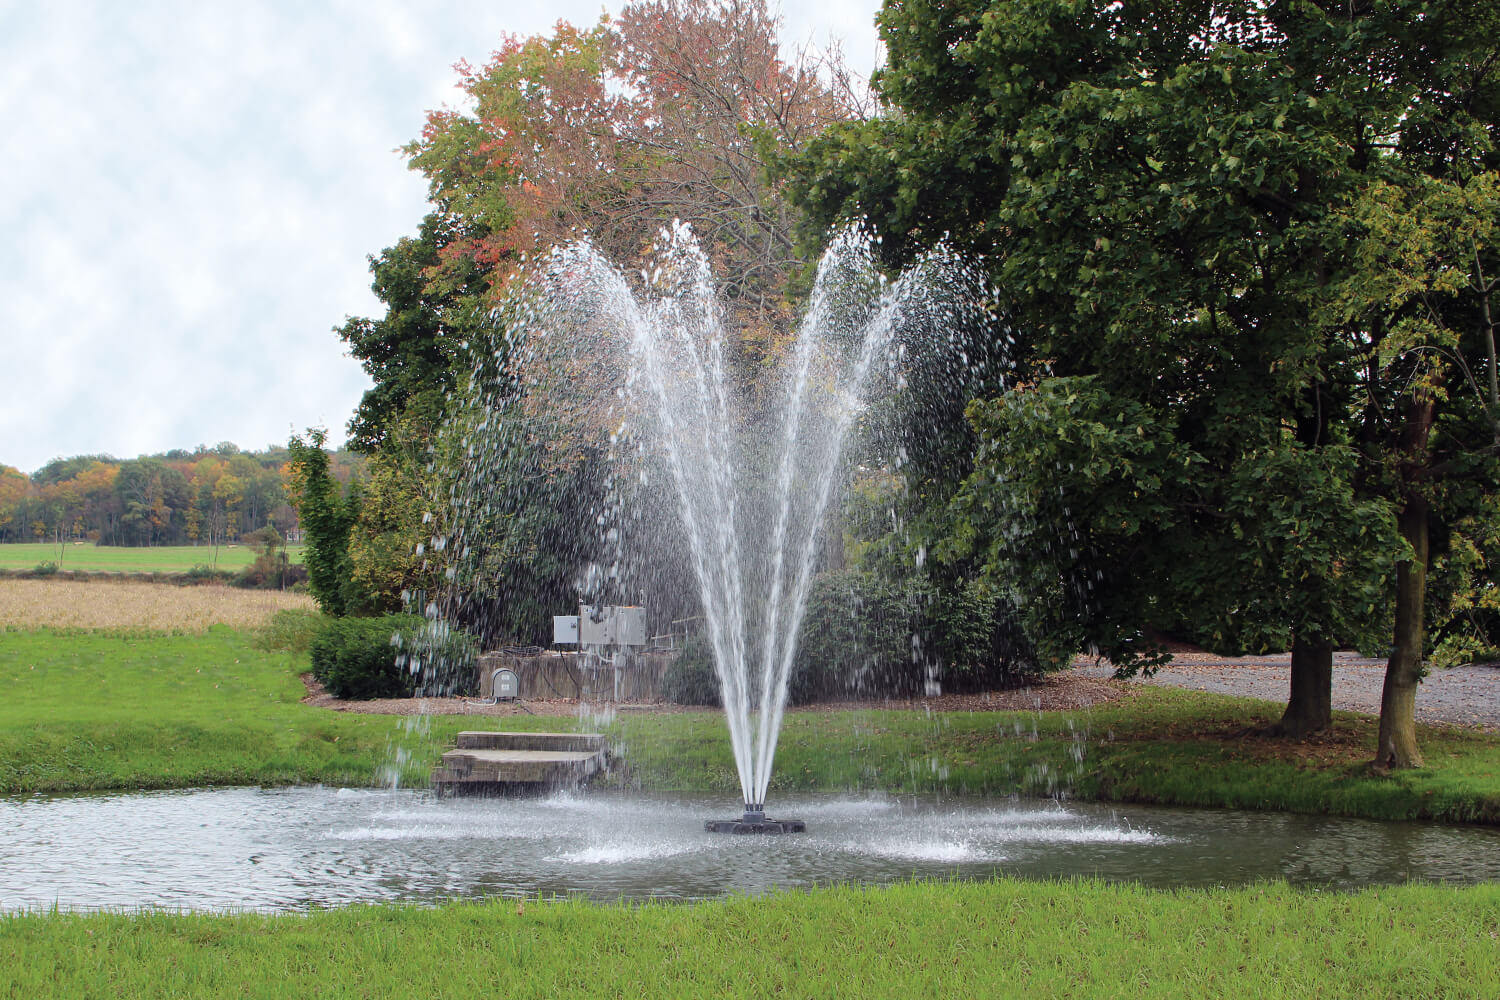 One of Otterbine's Omega Aerating Arch Fountains